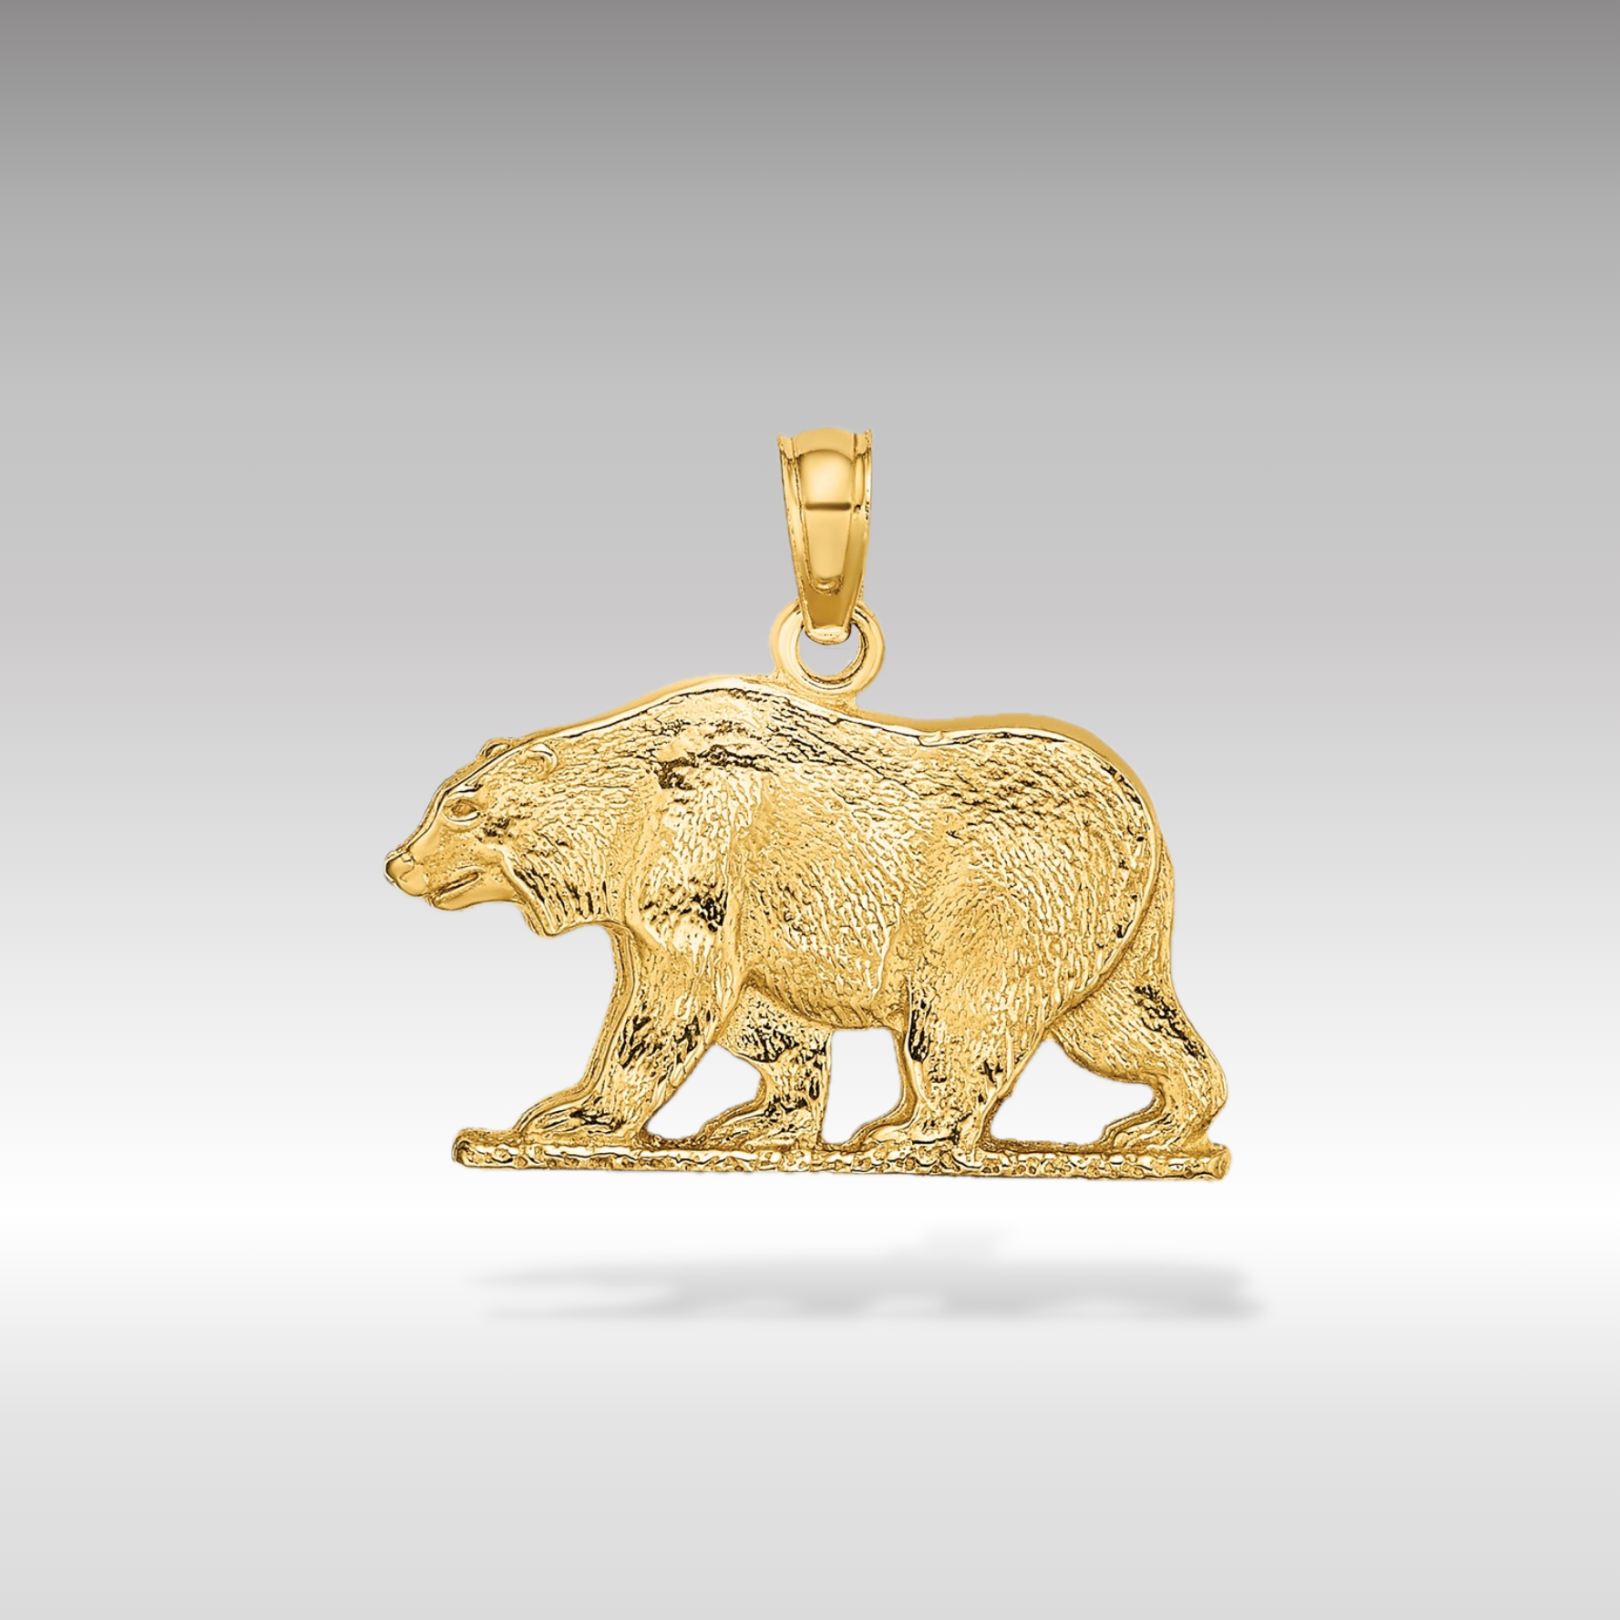 14K Gold Textured Bear Pendant - Charlie & Co. Jewelry